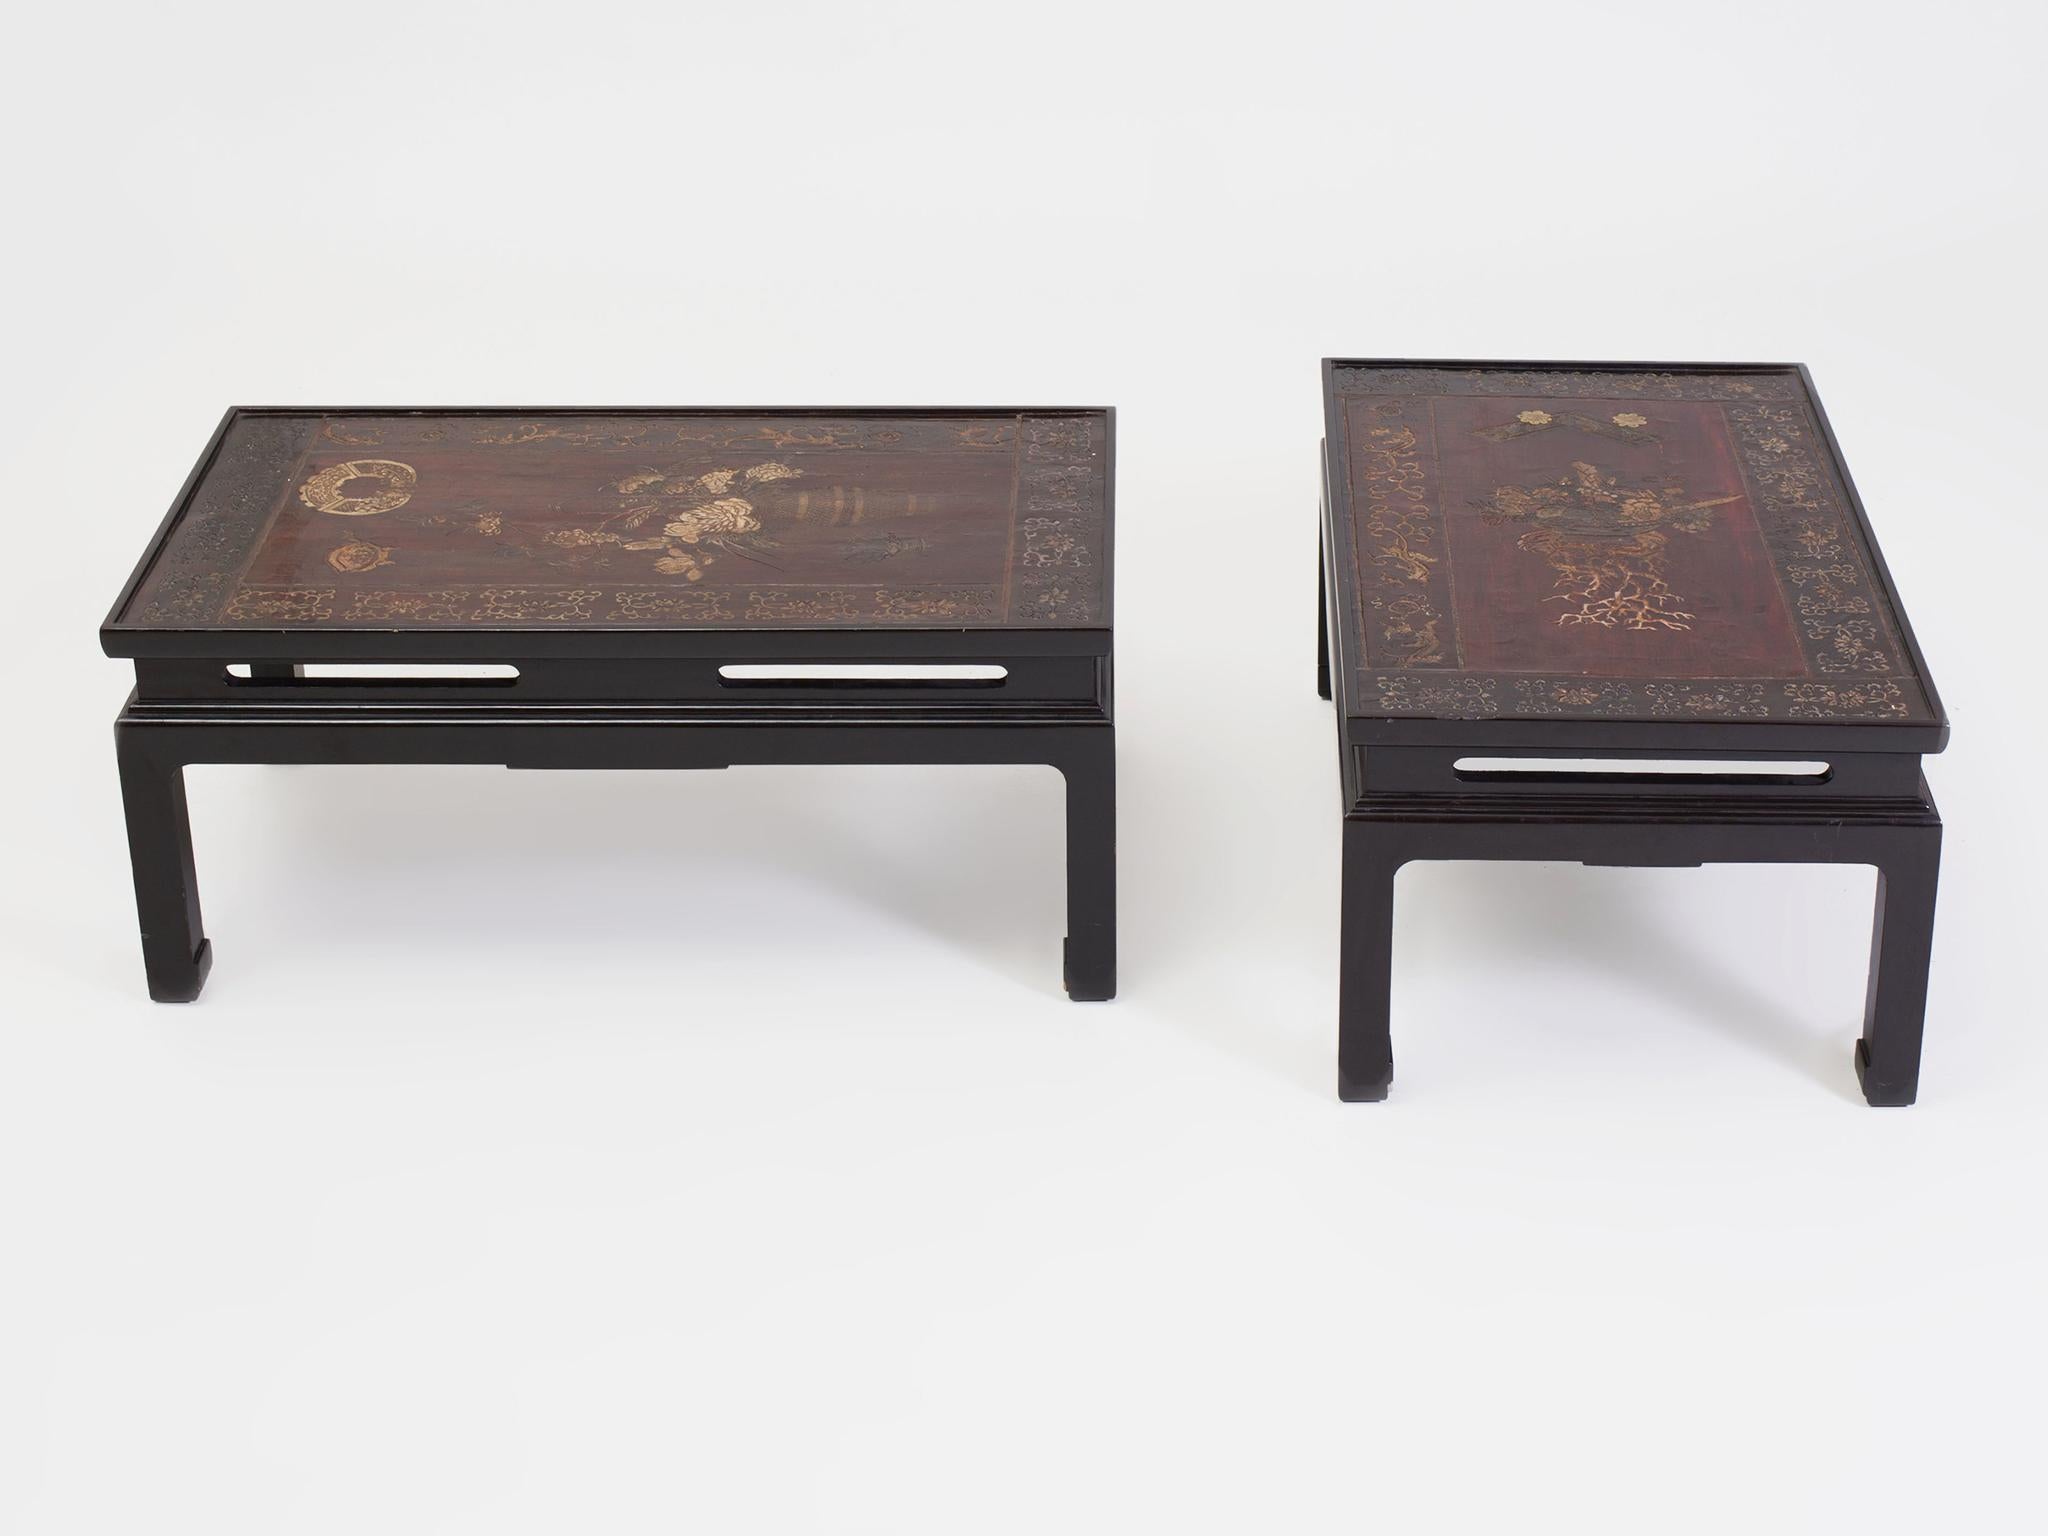 These two Chinese low tables were created in the Early 20th century. They are comprised of wood panels mounted as floating tabletops. The panels are coated with Coromandel lacquer and designed with intricately incised patterns. Floral still-life